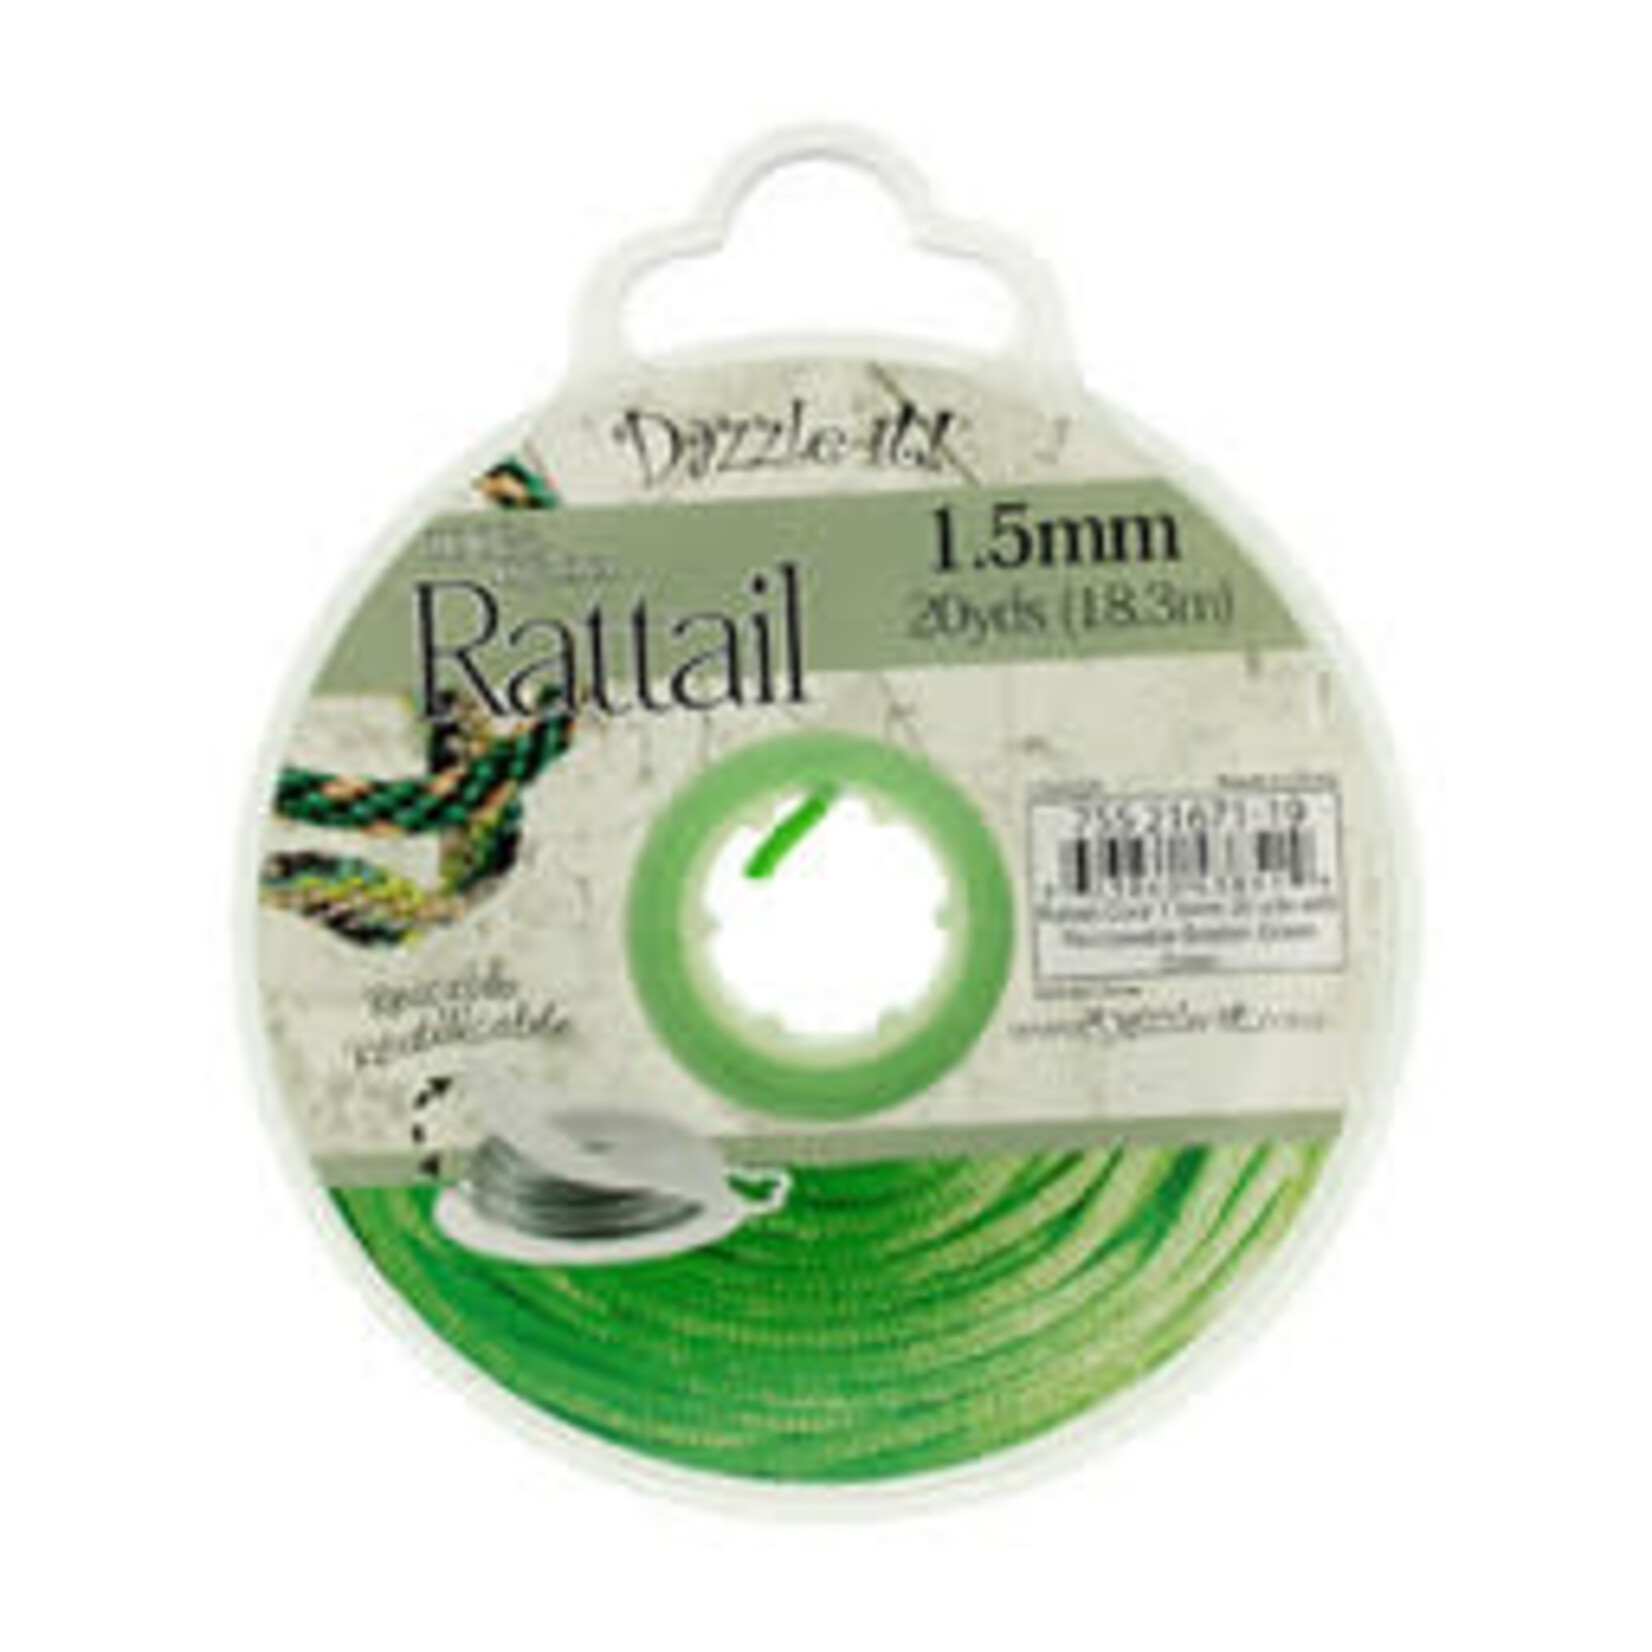 Rattail Cord With Re-Useable Bobbin (20 Yards)